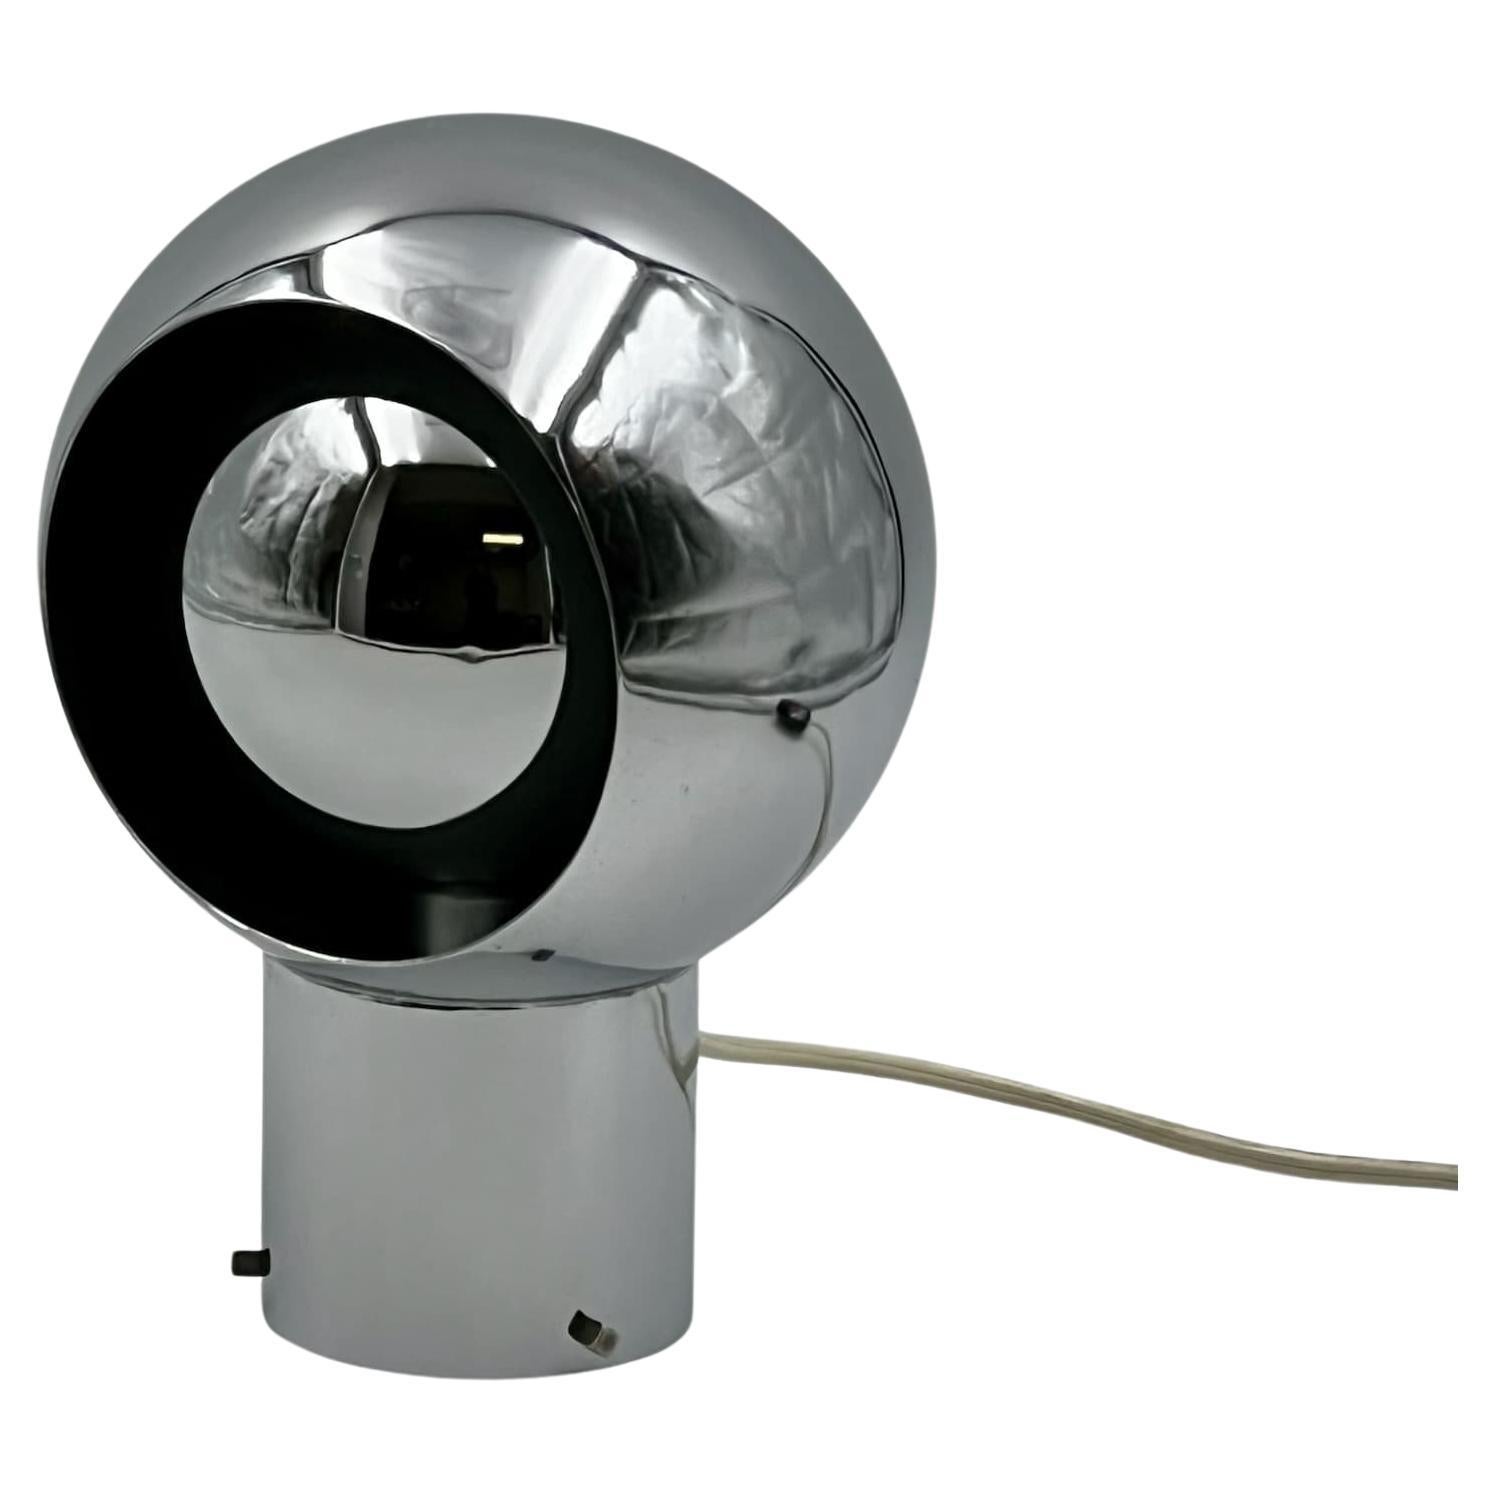 Italian 60s Iconic Eyeball Lamp - Space Age Table Lamp Reggiani Eclipse Style For Sale